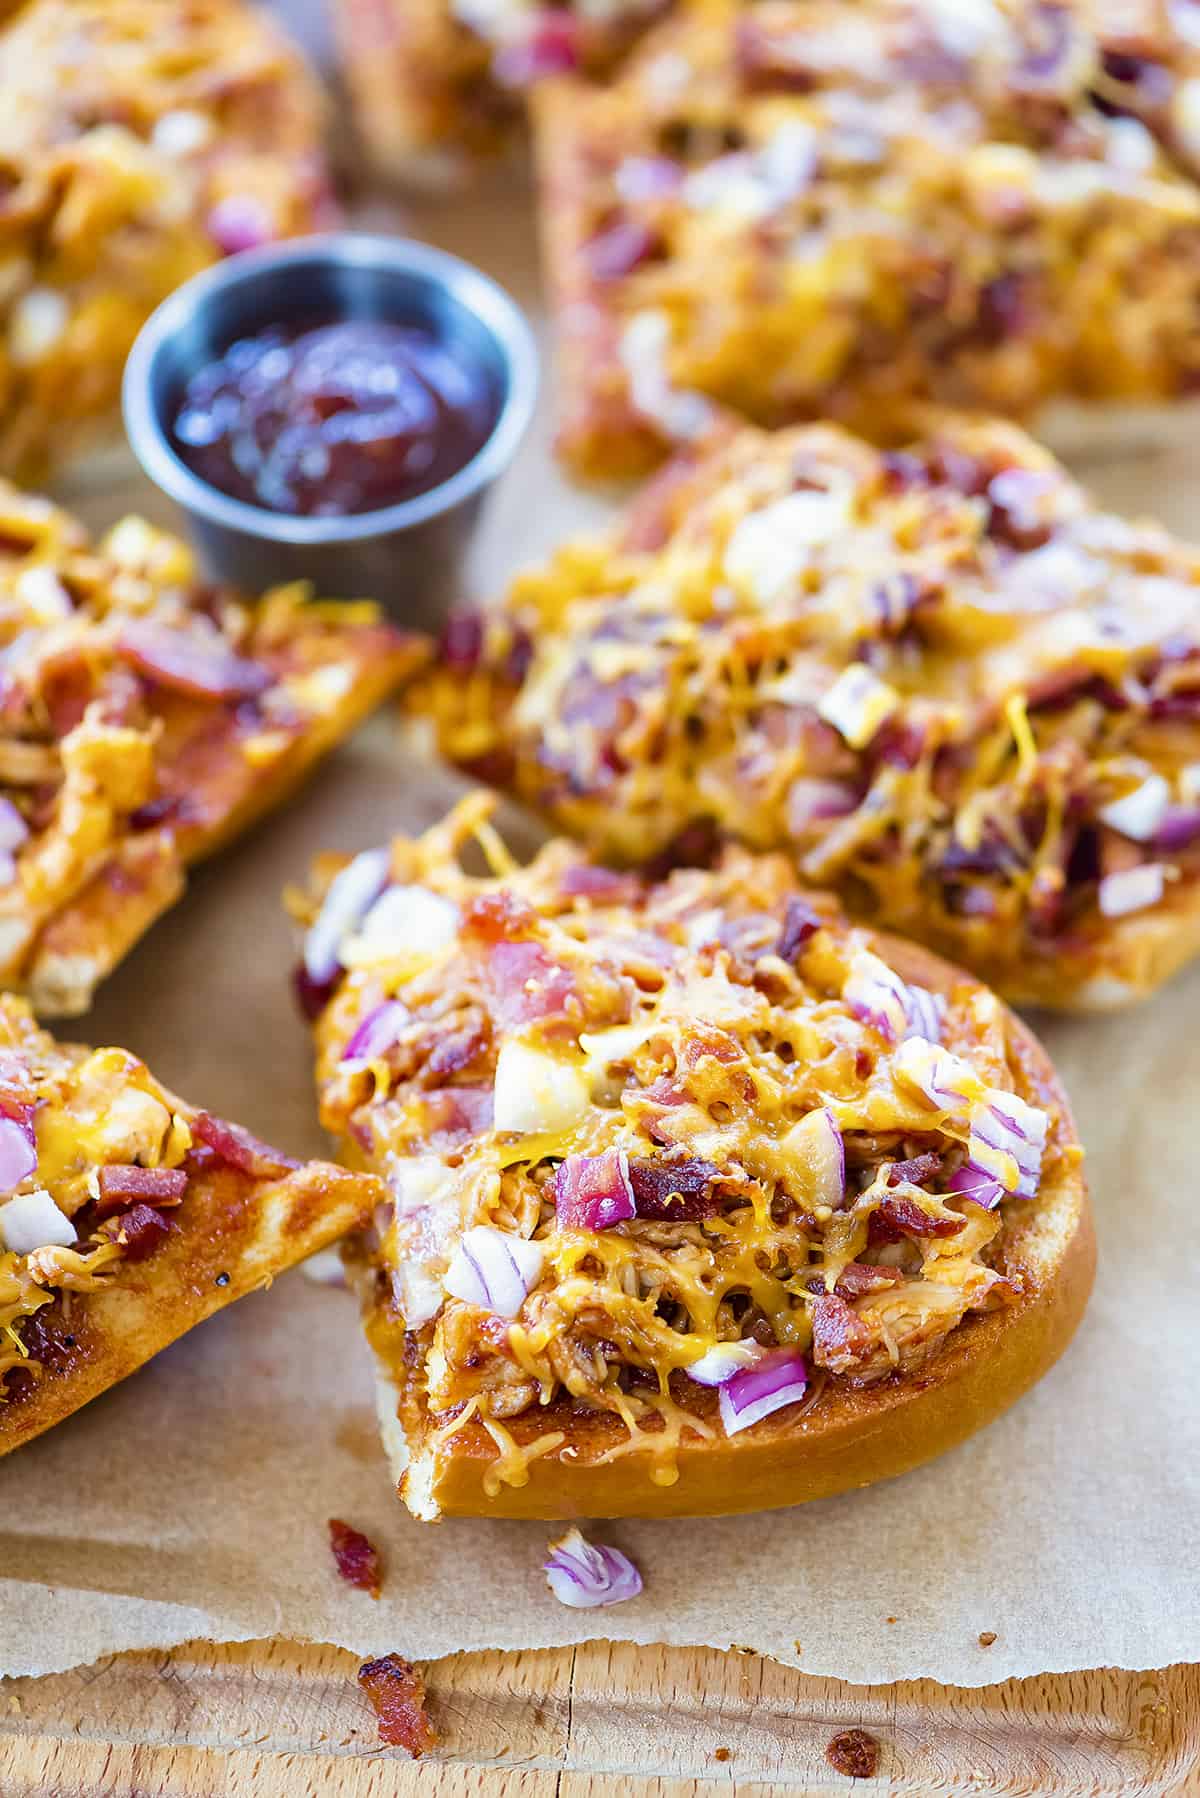 BBQ pizza bread with side of bbq sauce.